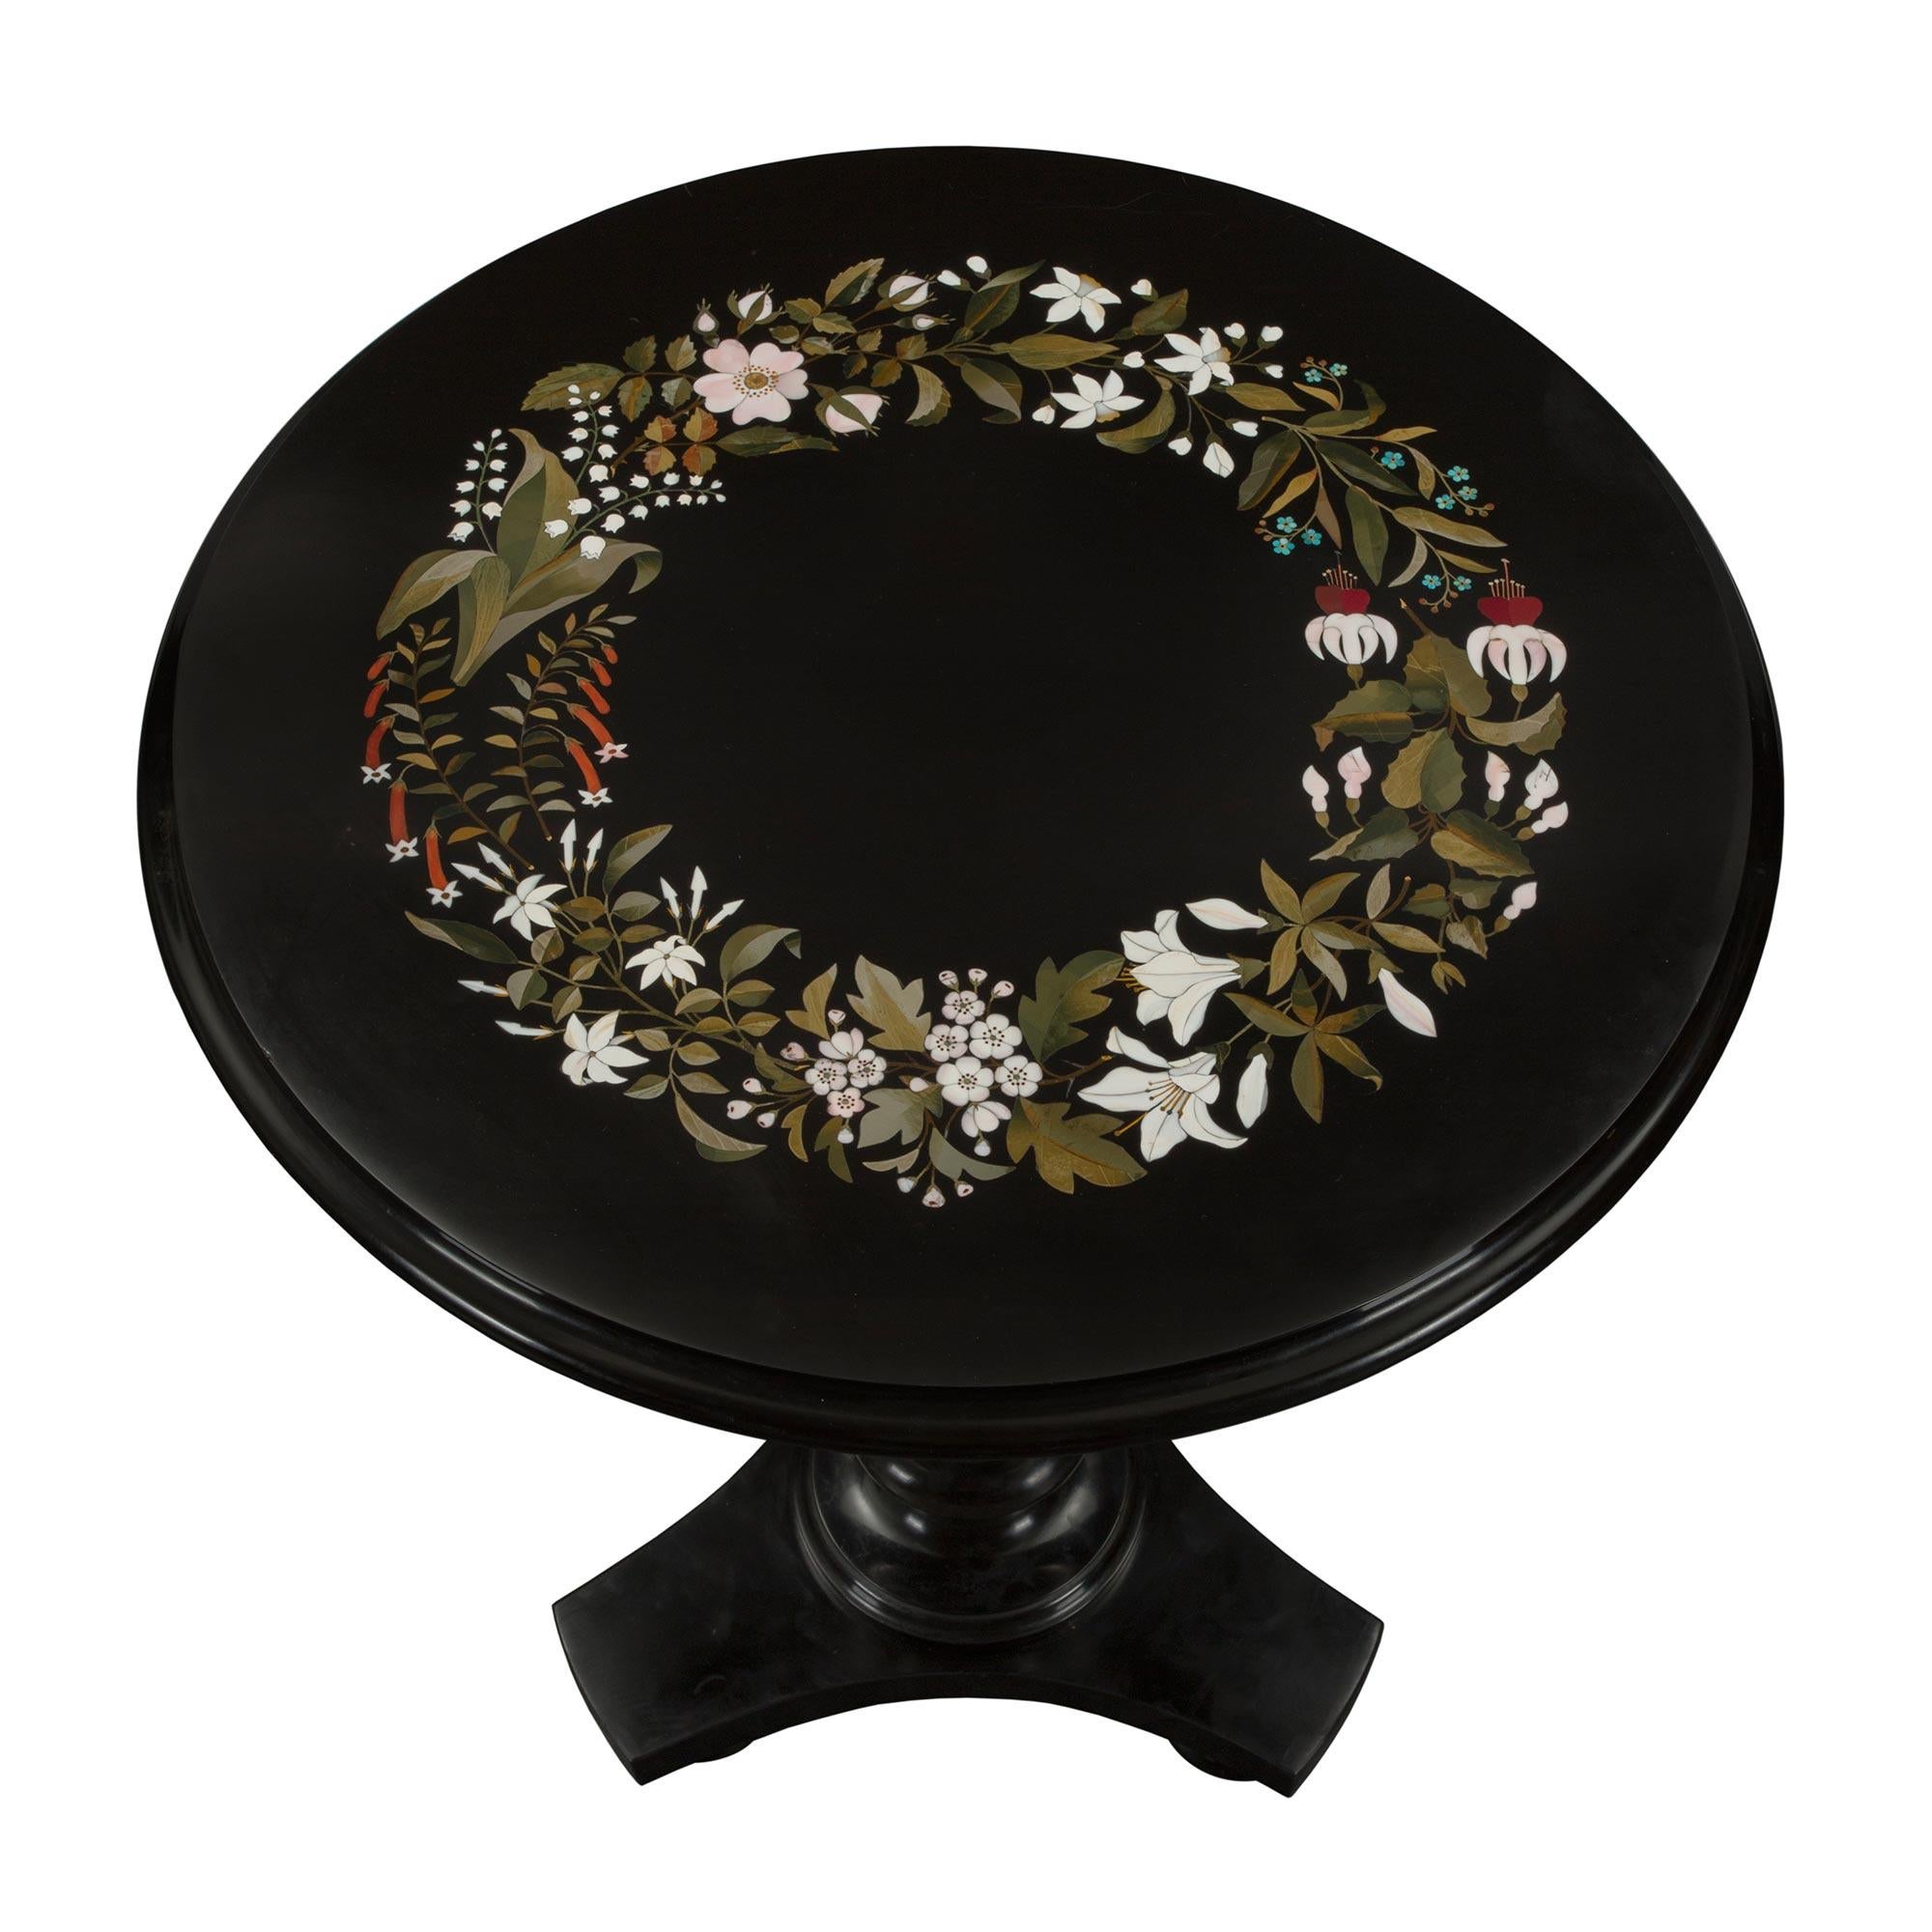 A striking Italian 19th century Black Belgian marble and Pietra Dura side table. The table is raised by a triangular base with concave sides and bun feet. The circular central support displays a most attractive carved turned design while the